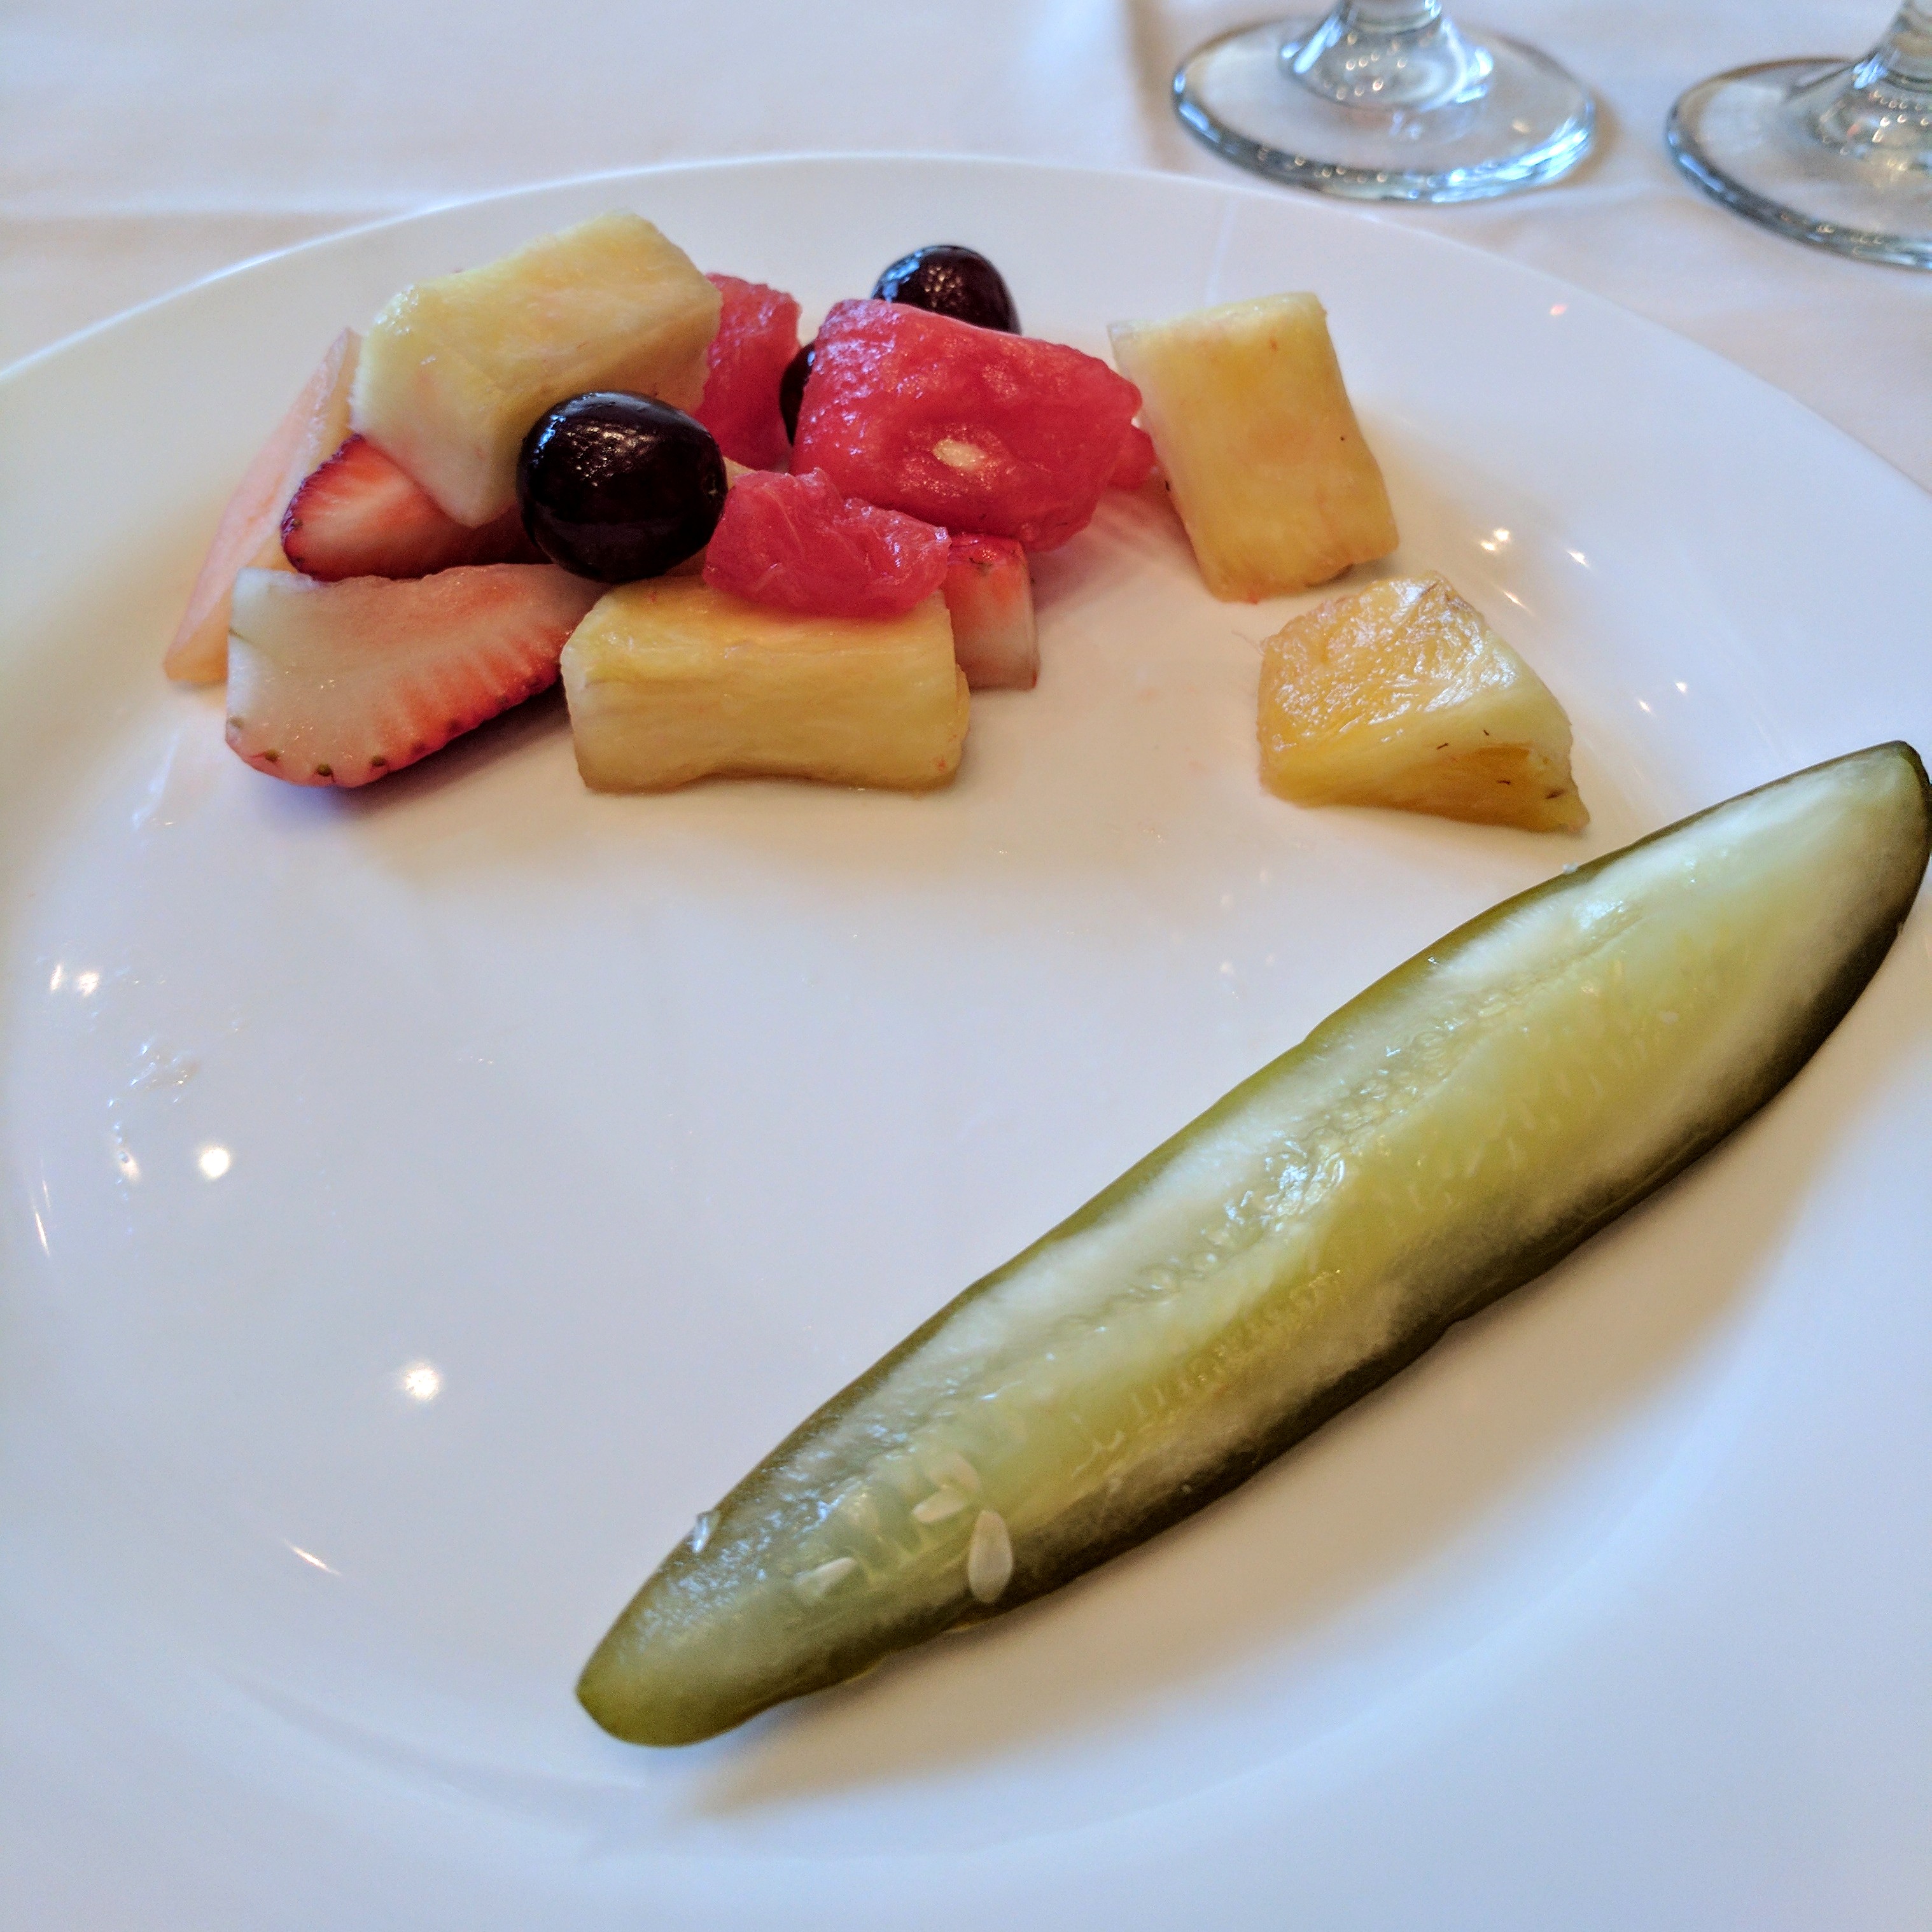 A pickle and some fruit